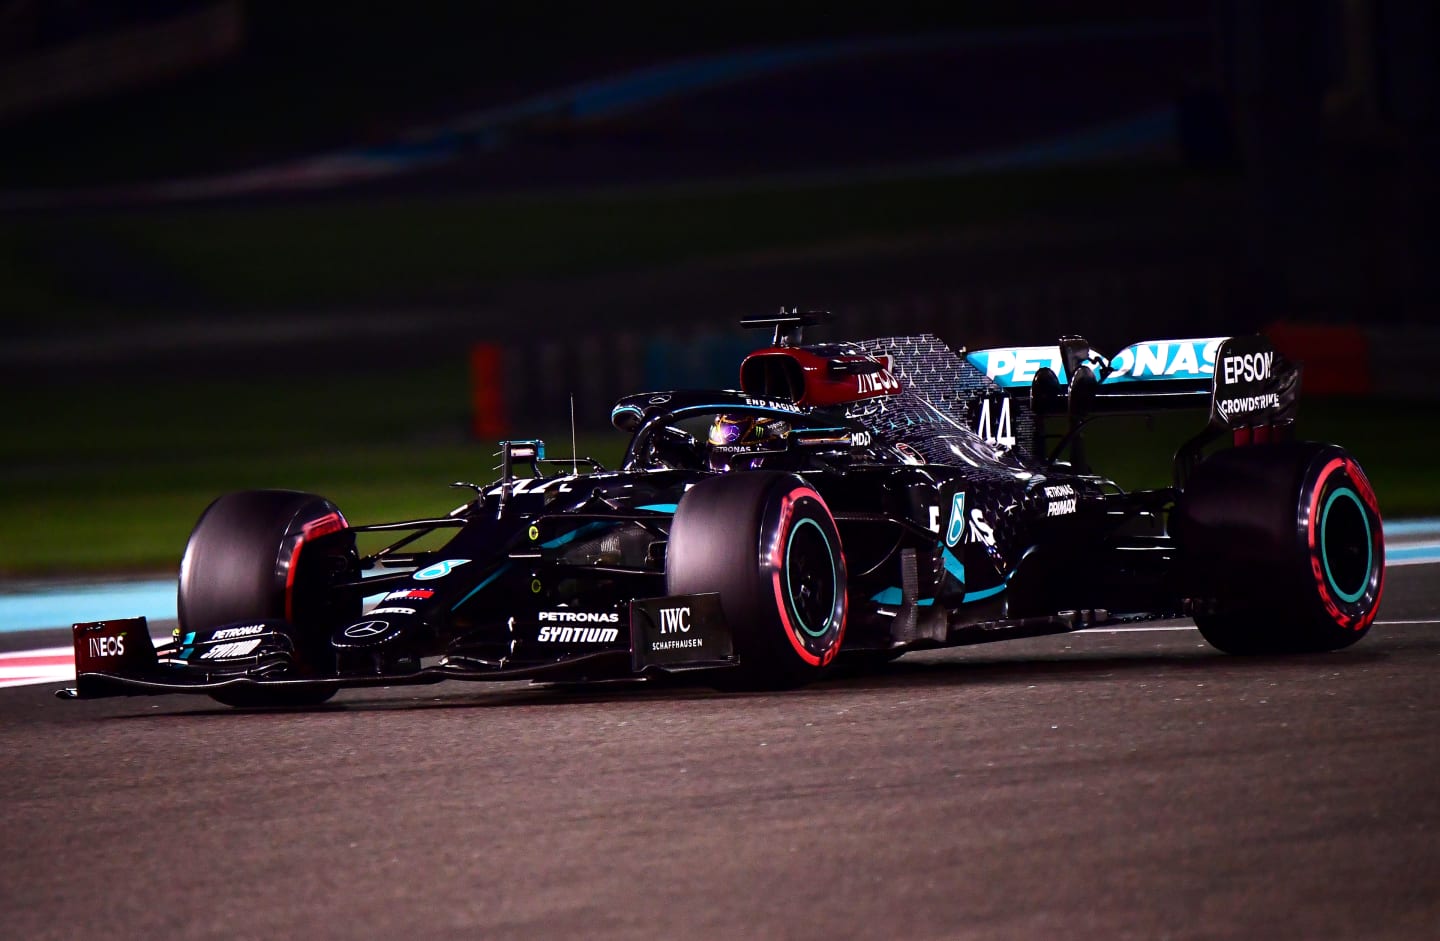 ABU DHABI, UNITED ARAB EMIRATES - DECEMBER 12: Lewis Hamilton of Great Britain driving the (44) Mercedes AMG Petronas F1 Team Mercedes W11 on track during qualifying ahead of the F1 Grand Prix of Abu Dhabi at Yas Marina Circuit on December 12, 2020 in Abu Dhabi, United Arab Emirates. (Photo by Giuseppe Cacace - Pool/Getty Images)